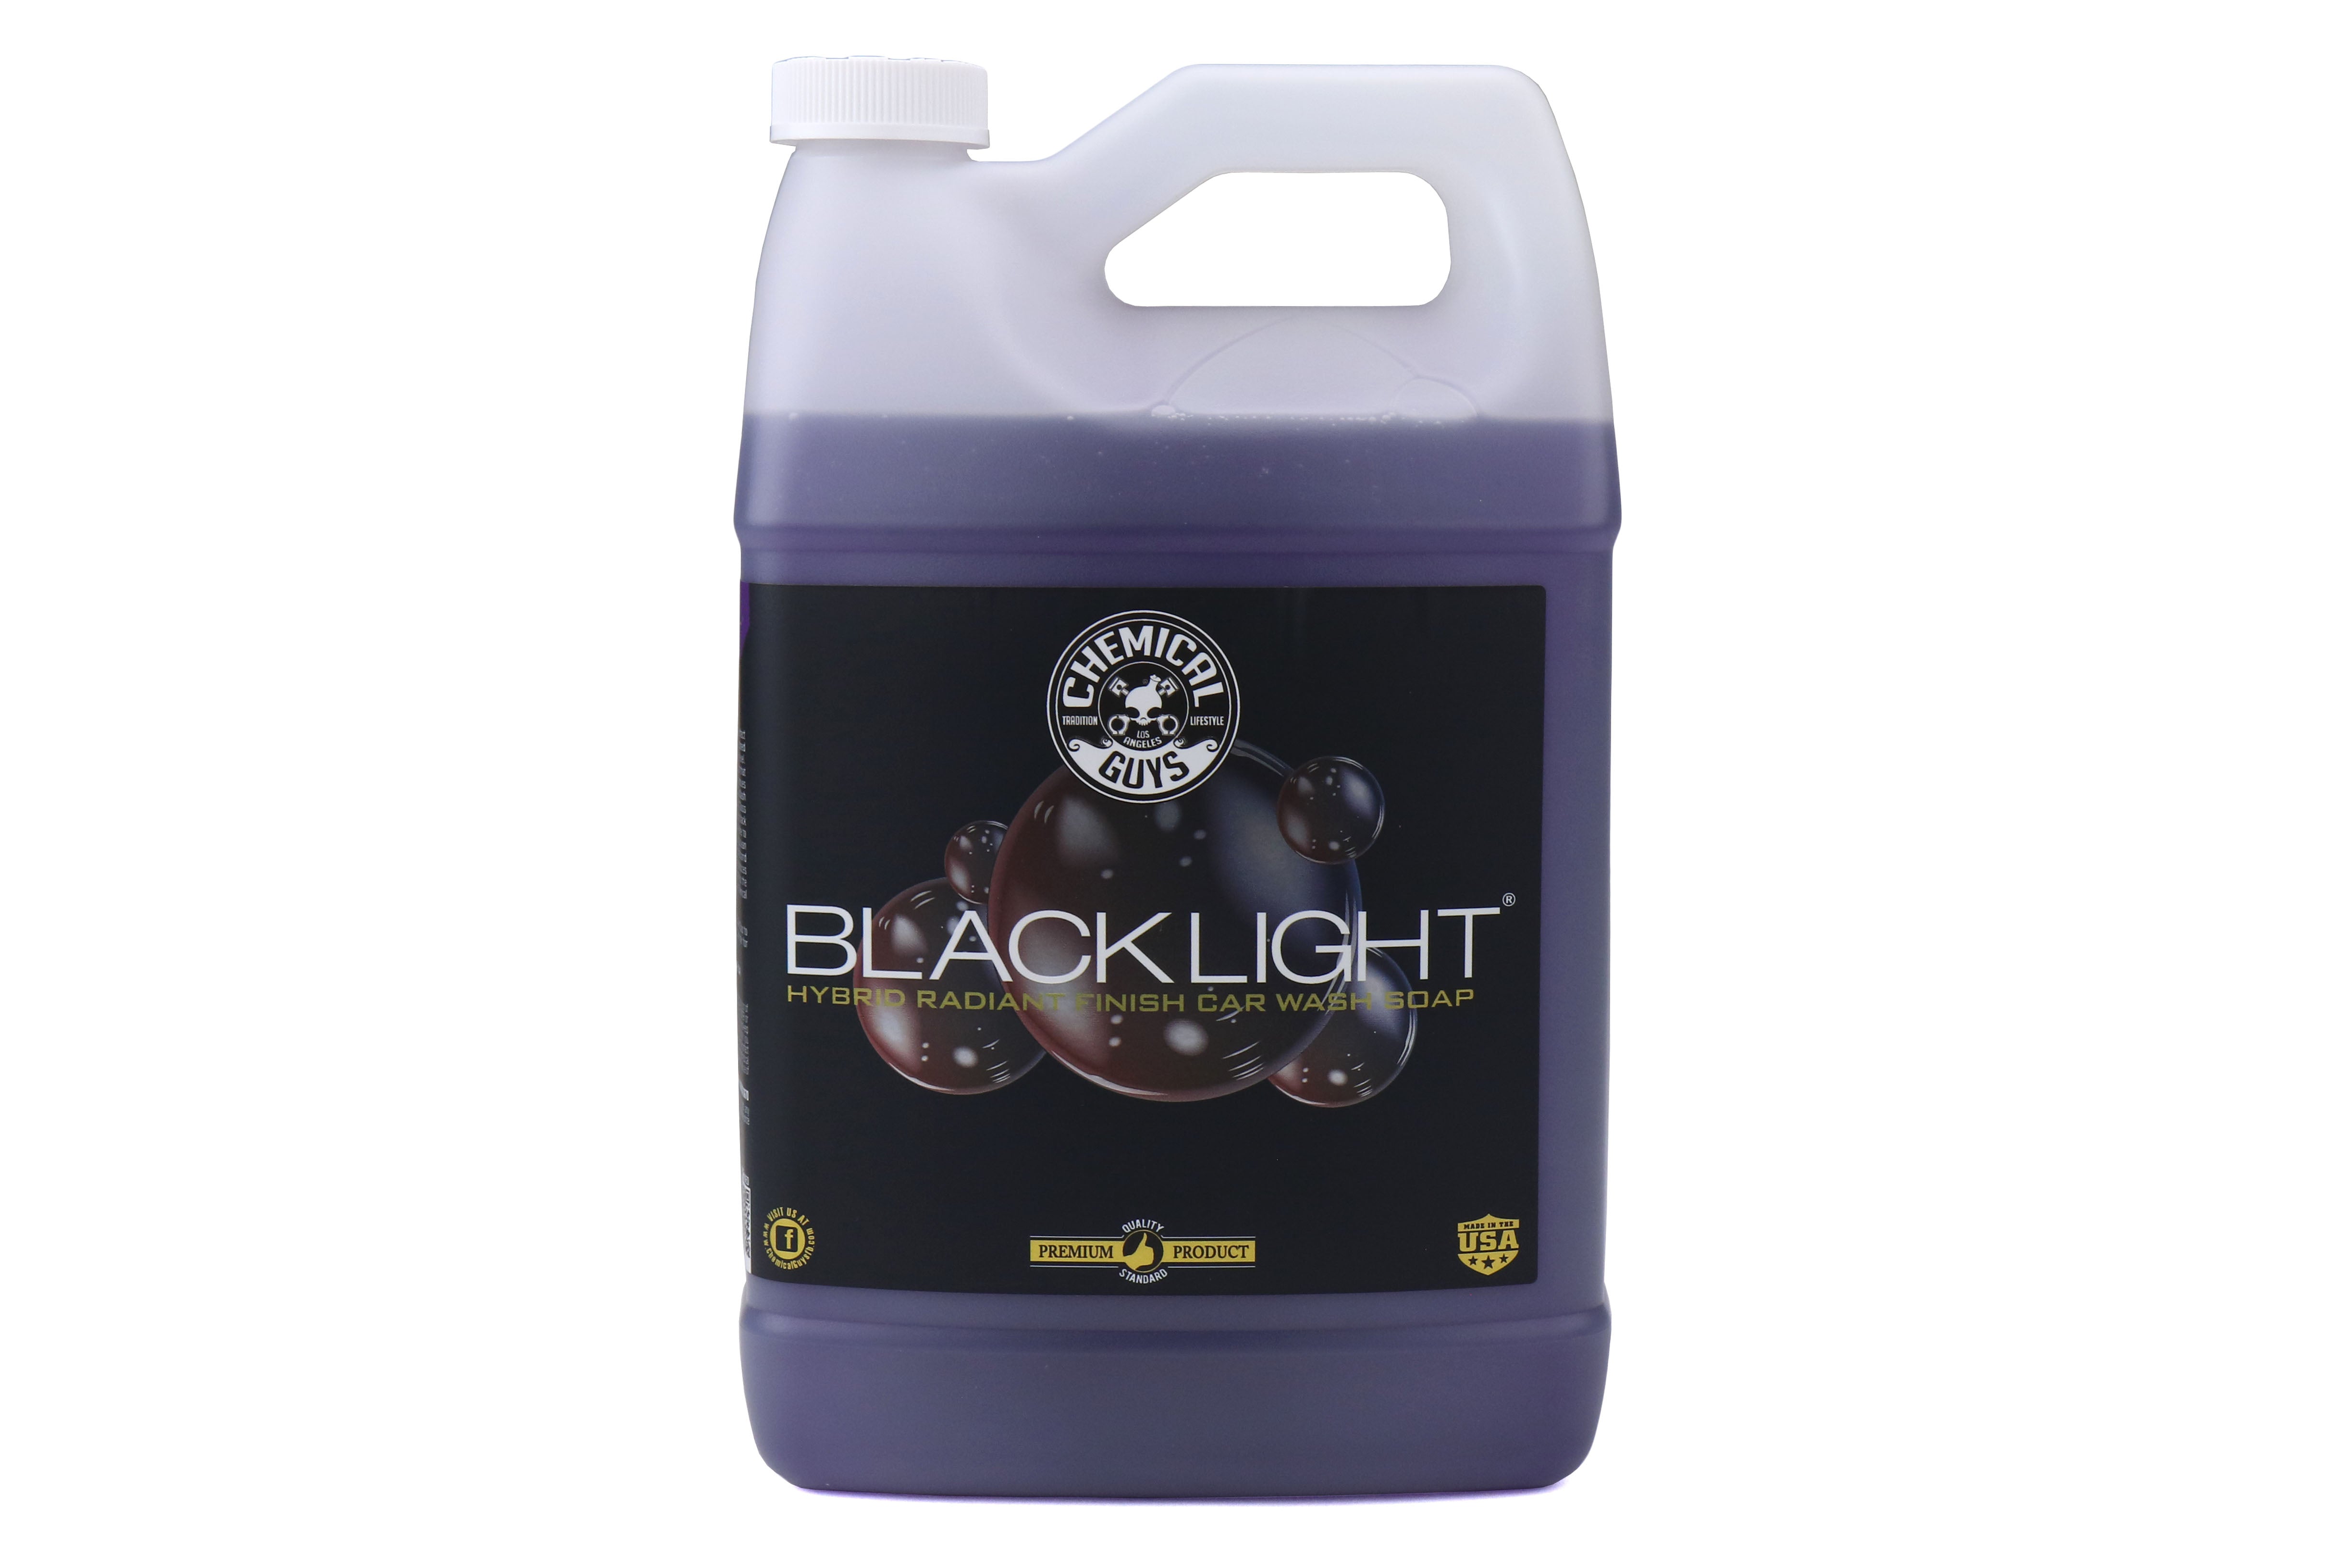 Chemical Guys BlackLight - Full Product Review